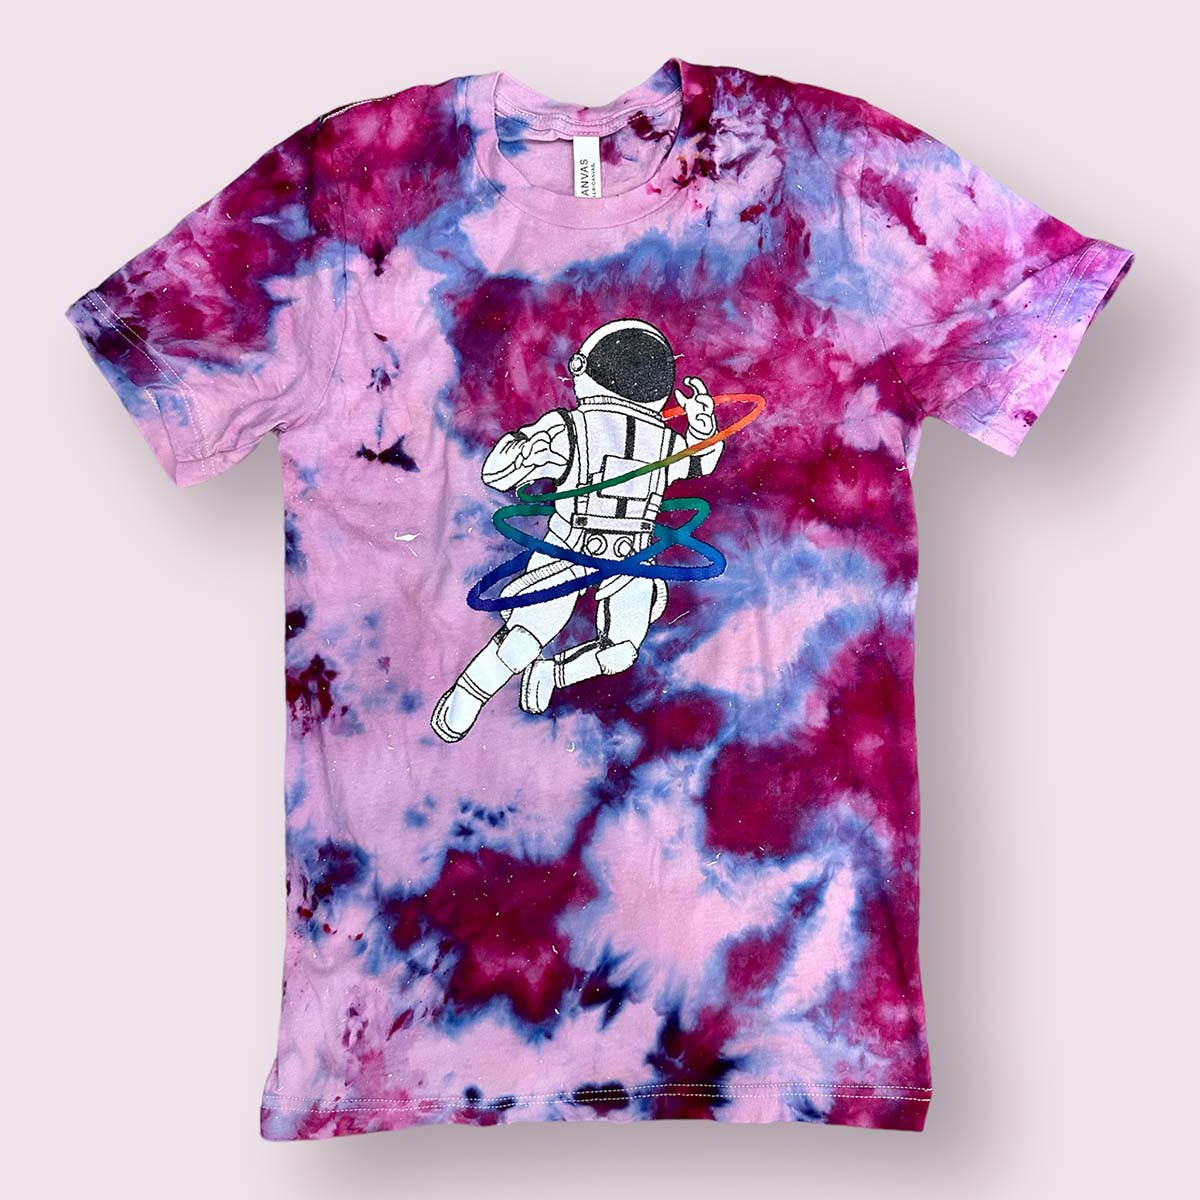 galaxy tie-dyed t-shirt speckled with paint featuring a rainbow gay astronaut graphic